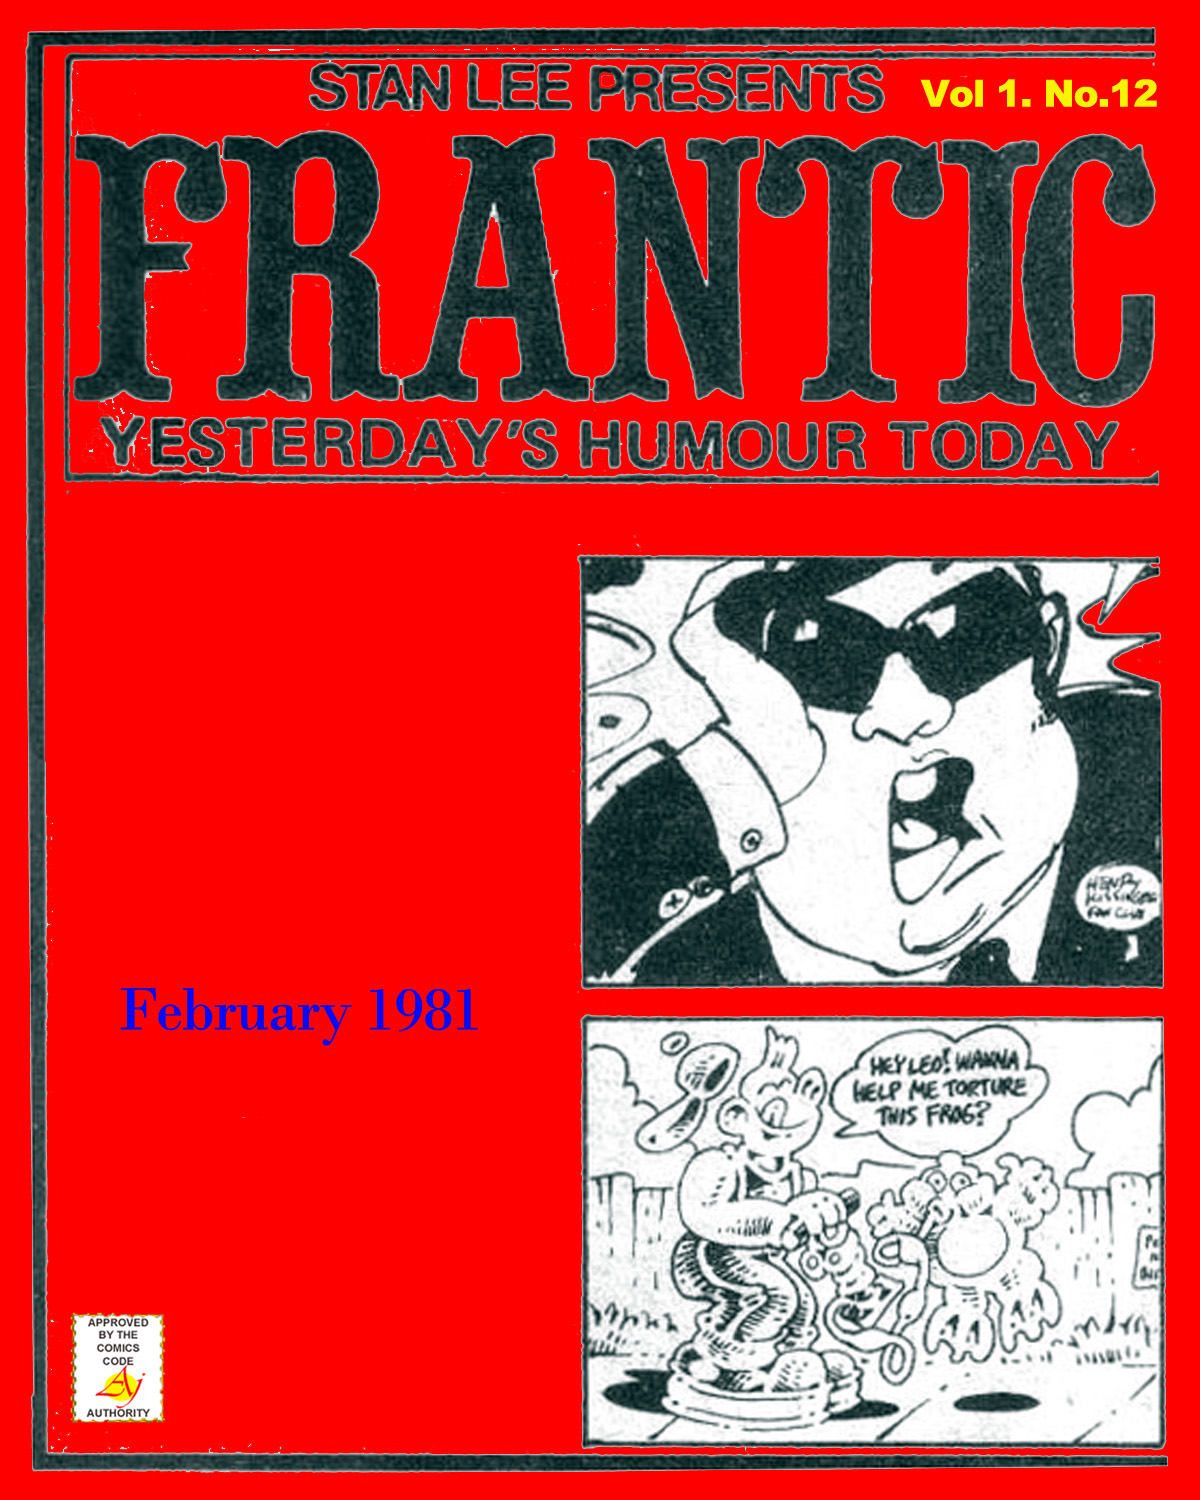 Read online Frantic comic -  Issue #12 - 1